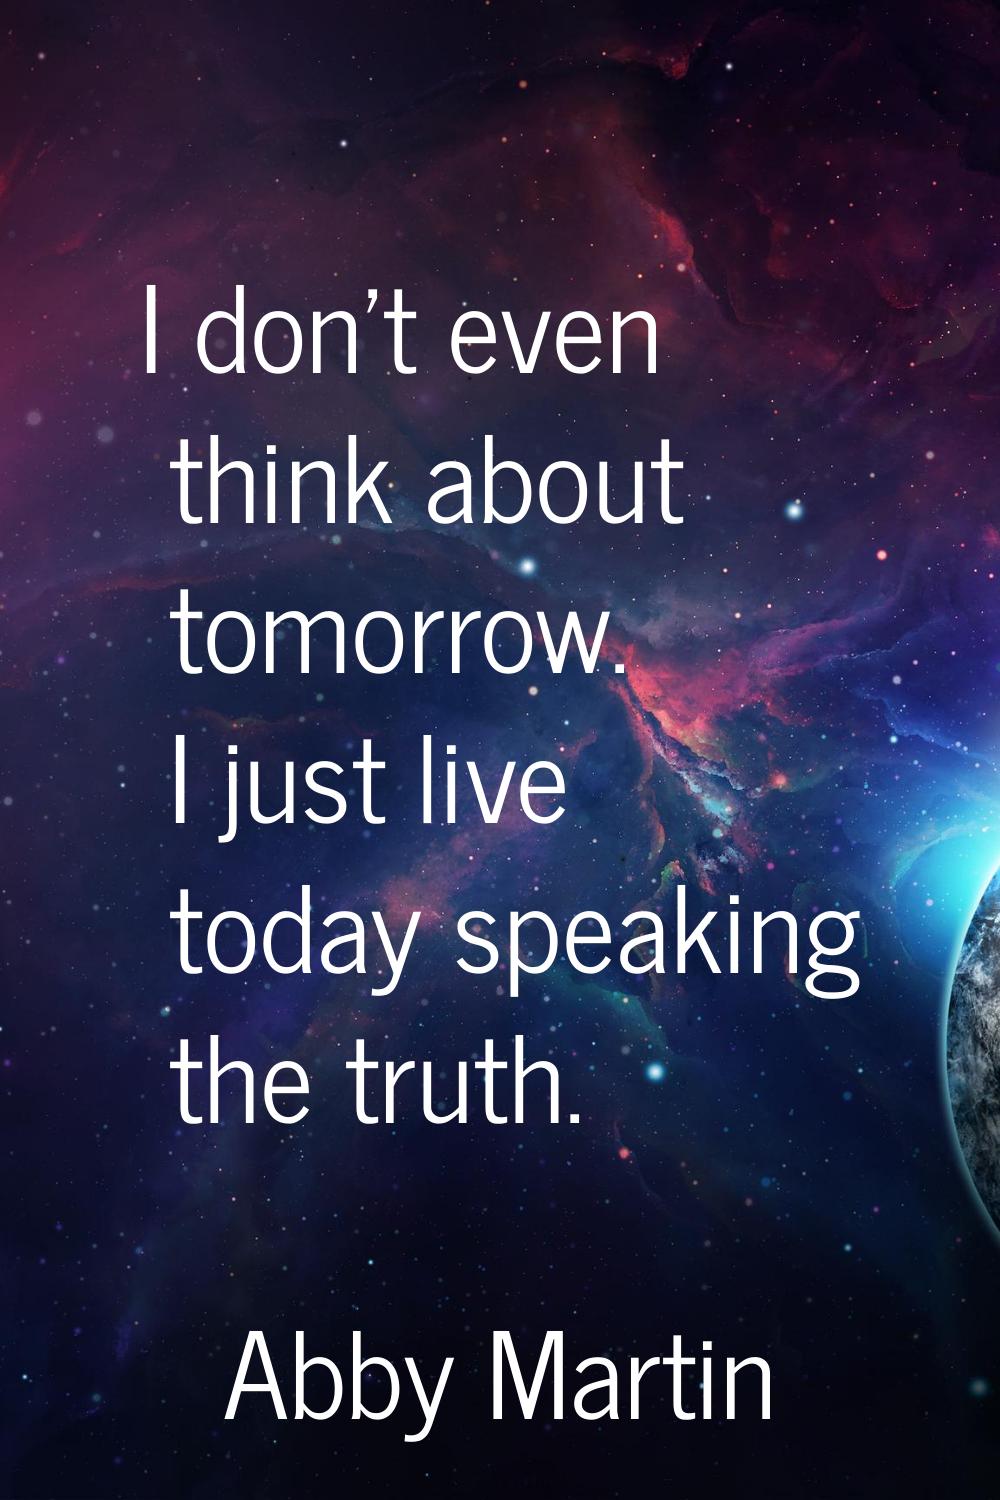 I don't even think about tomorrow. I just live today speaking the truth.